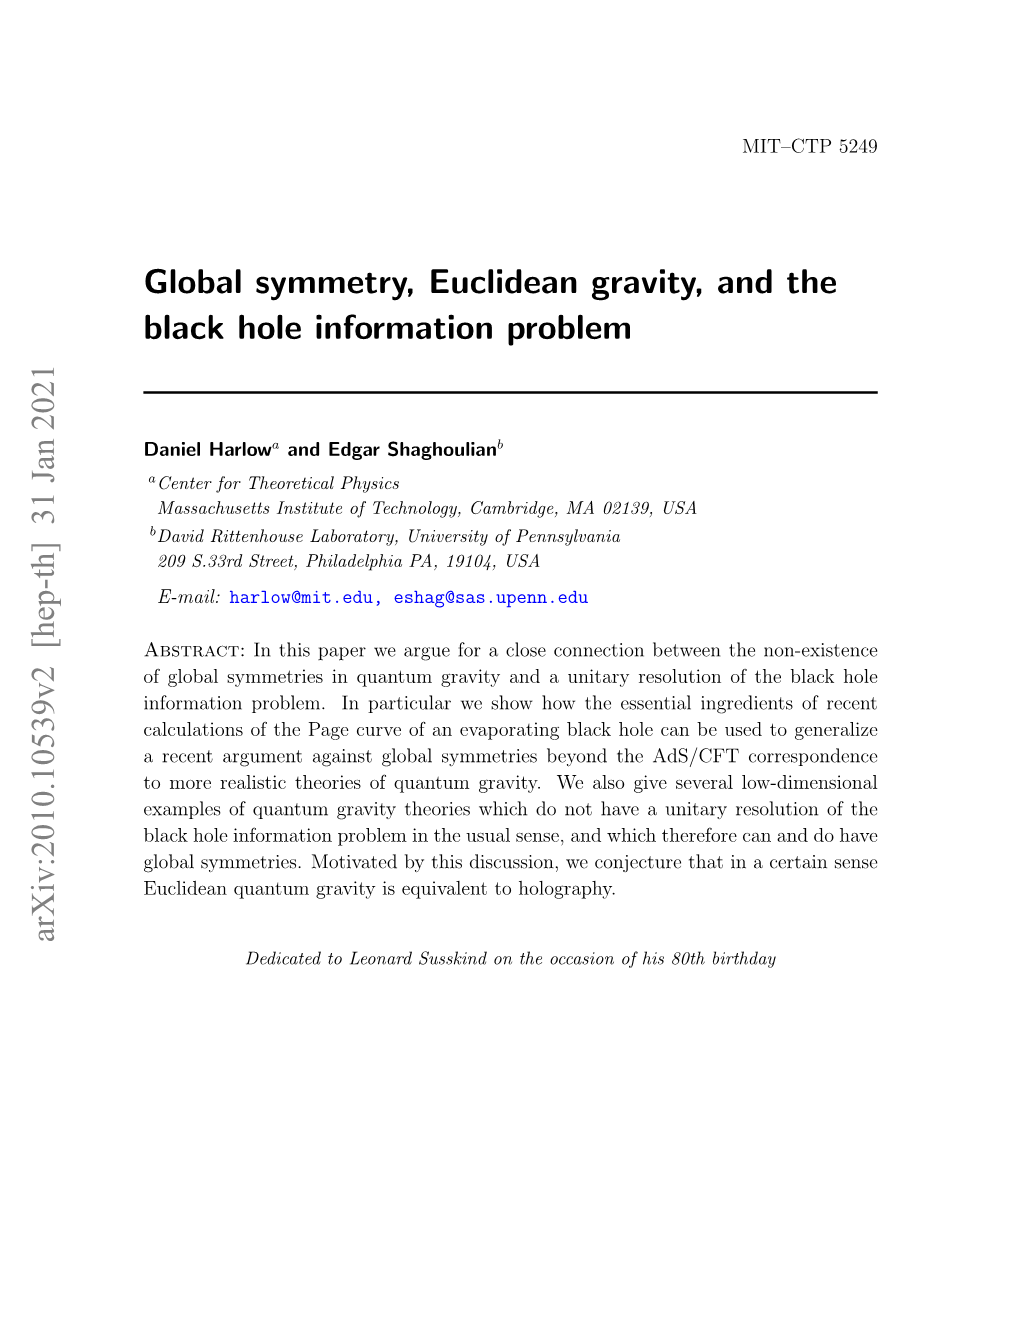 Global Symmetry, Euclidean Gravity, and the Black Hole Information Problem